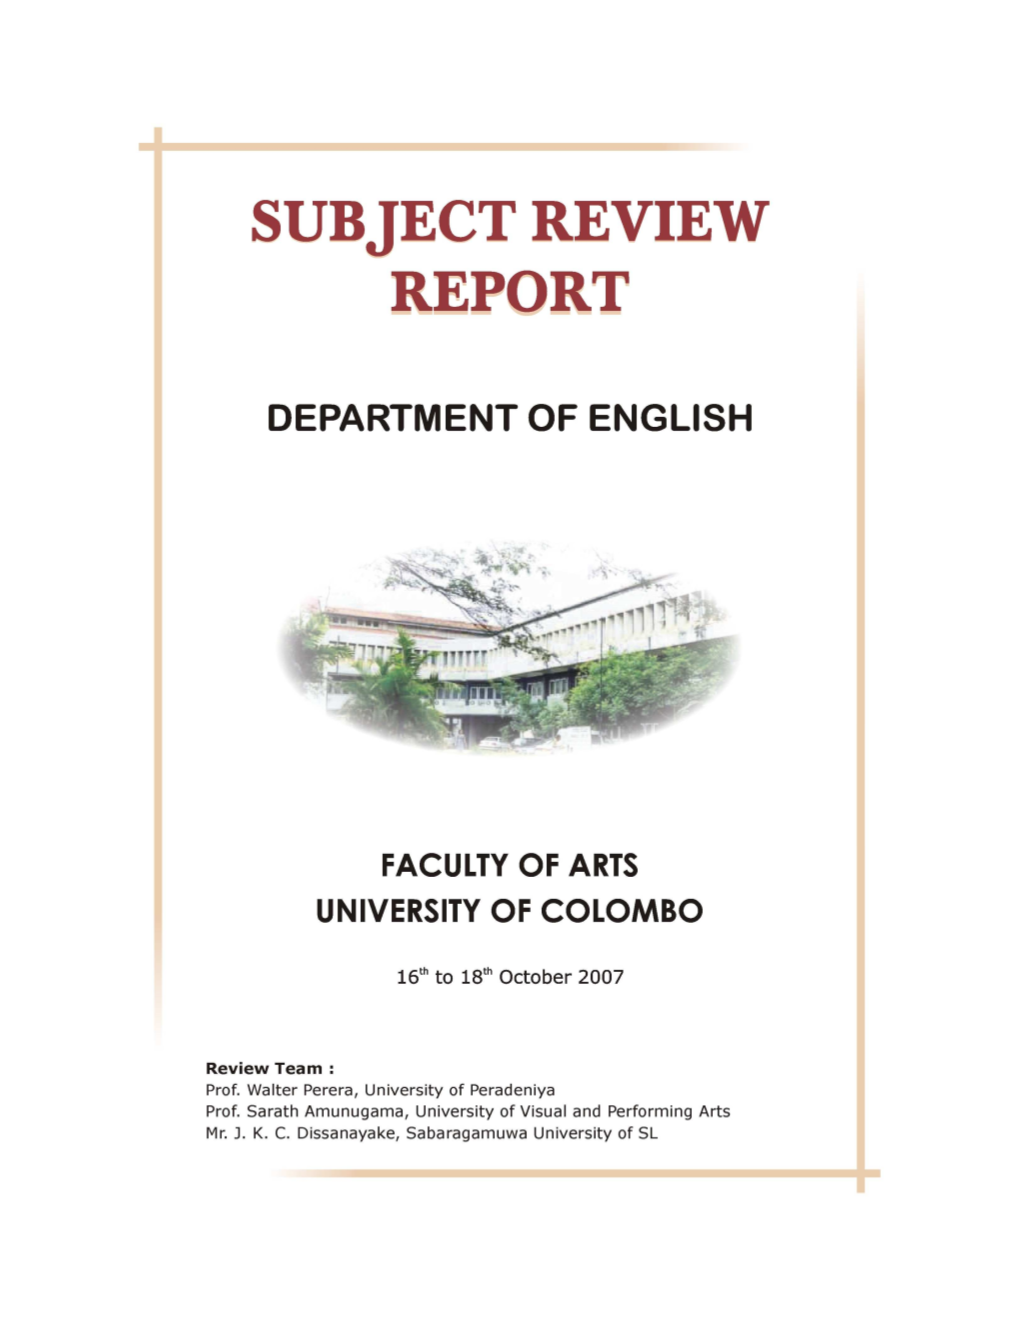 English at the University of Colombo